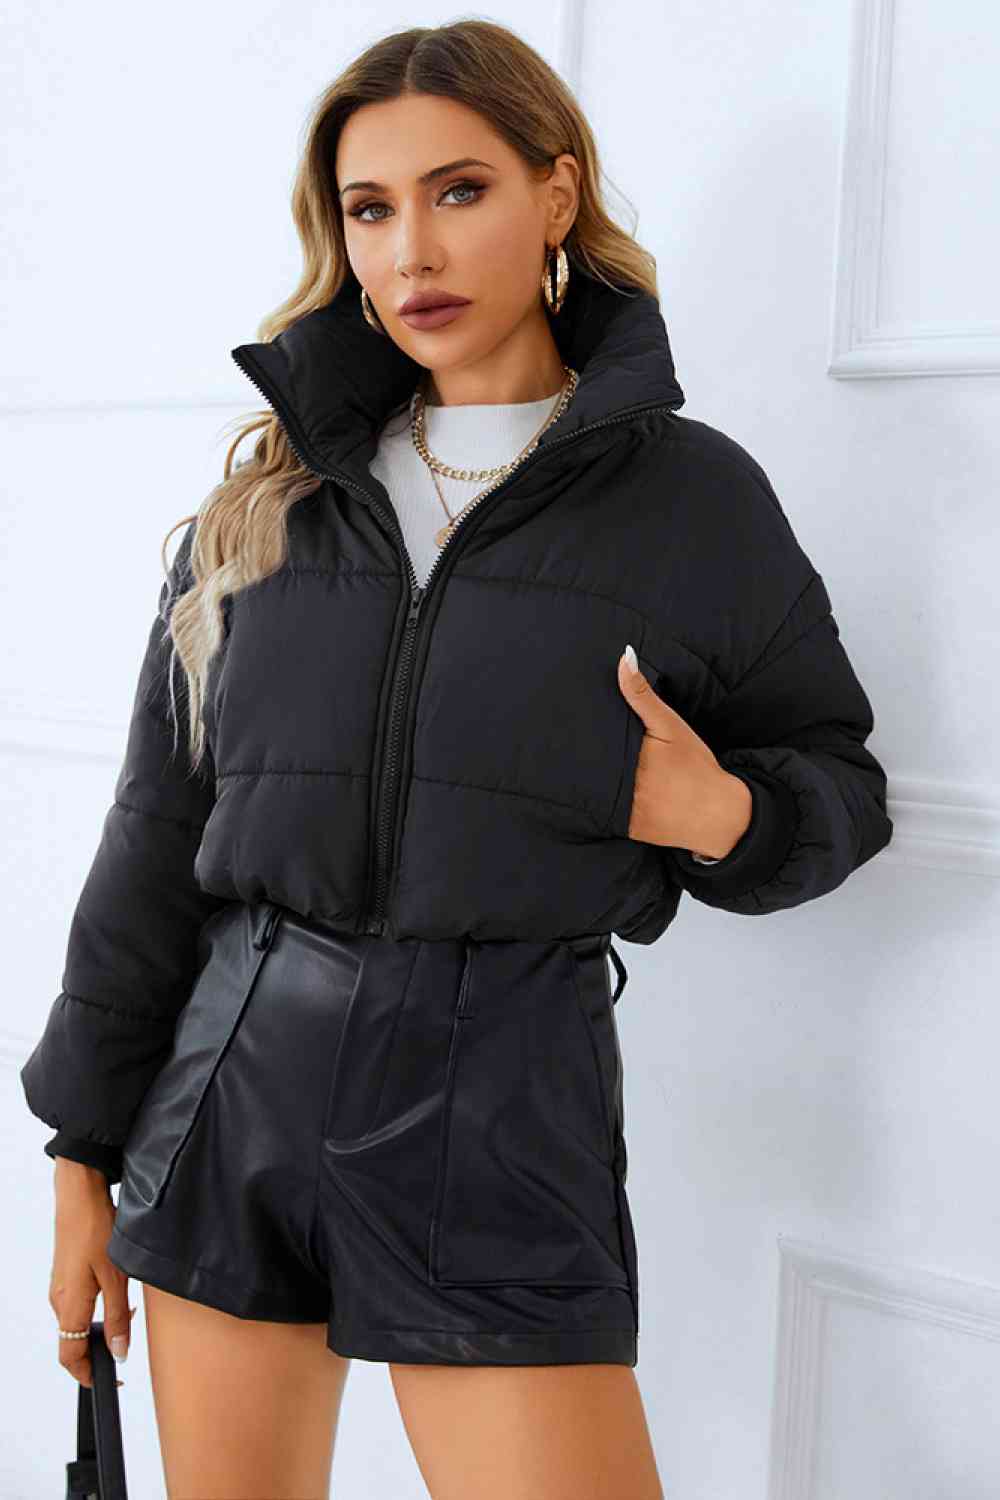 A winter coat designed for warmth and functionality, featuring multiple spacious pockets for added convenience.